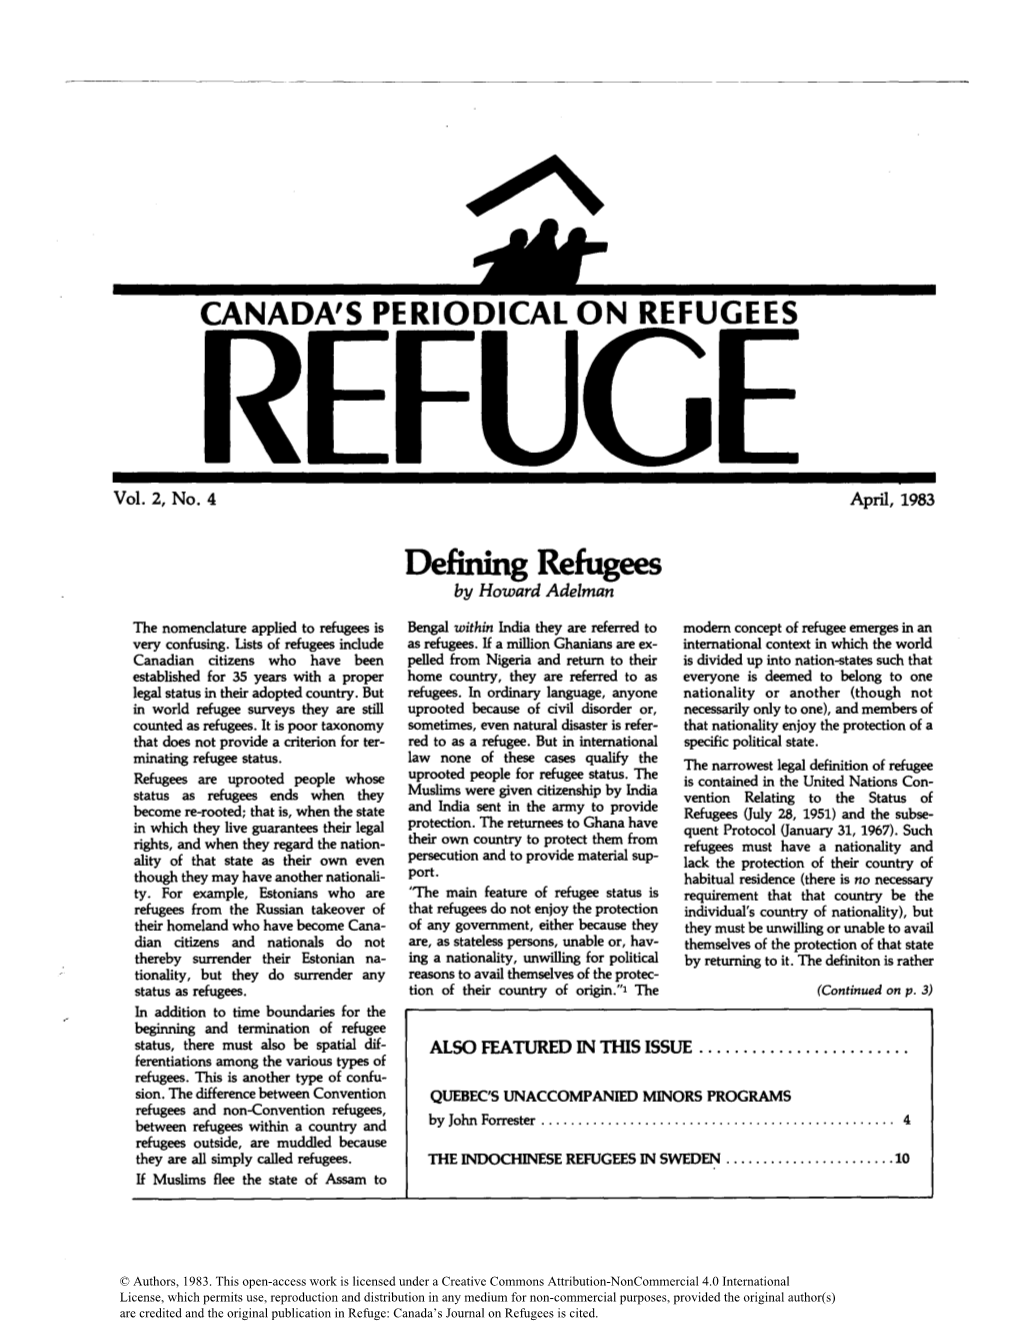 Defining Refugees by Howard Adelman